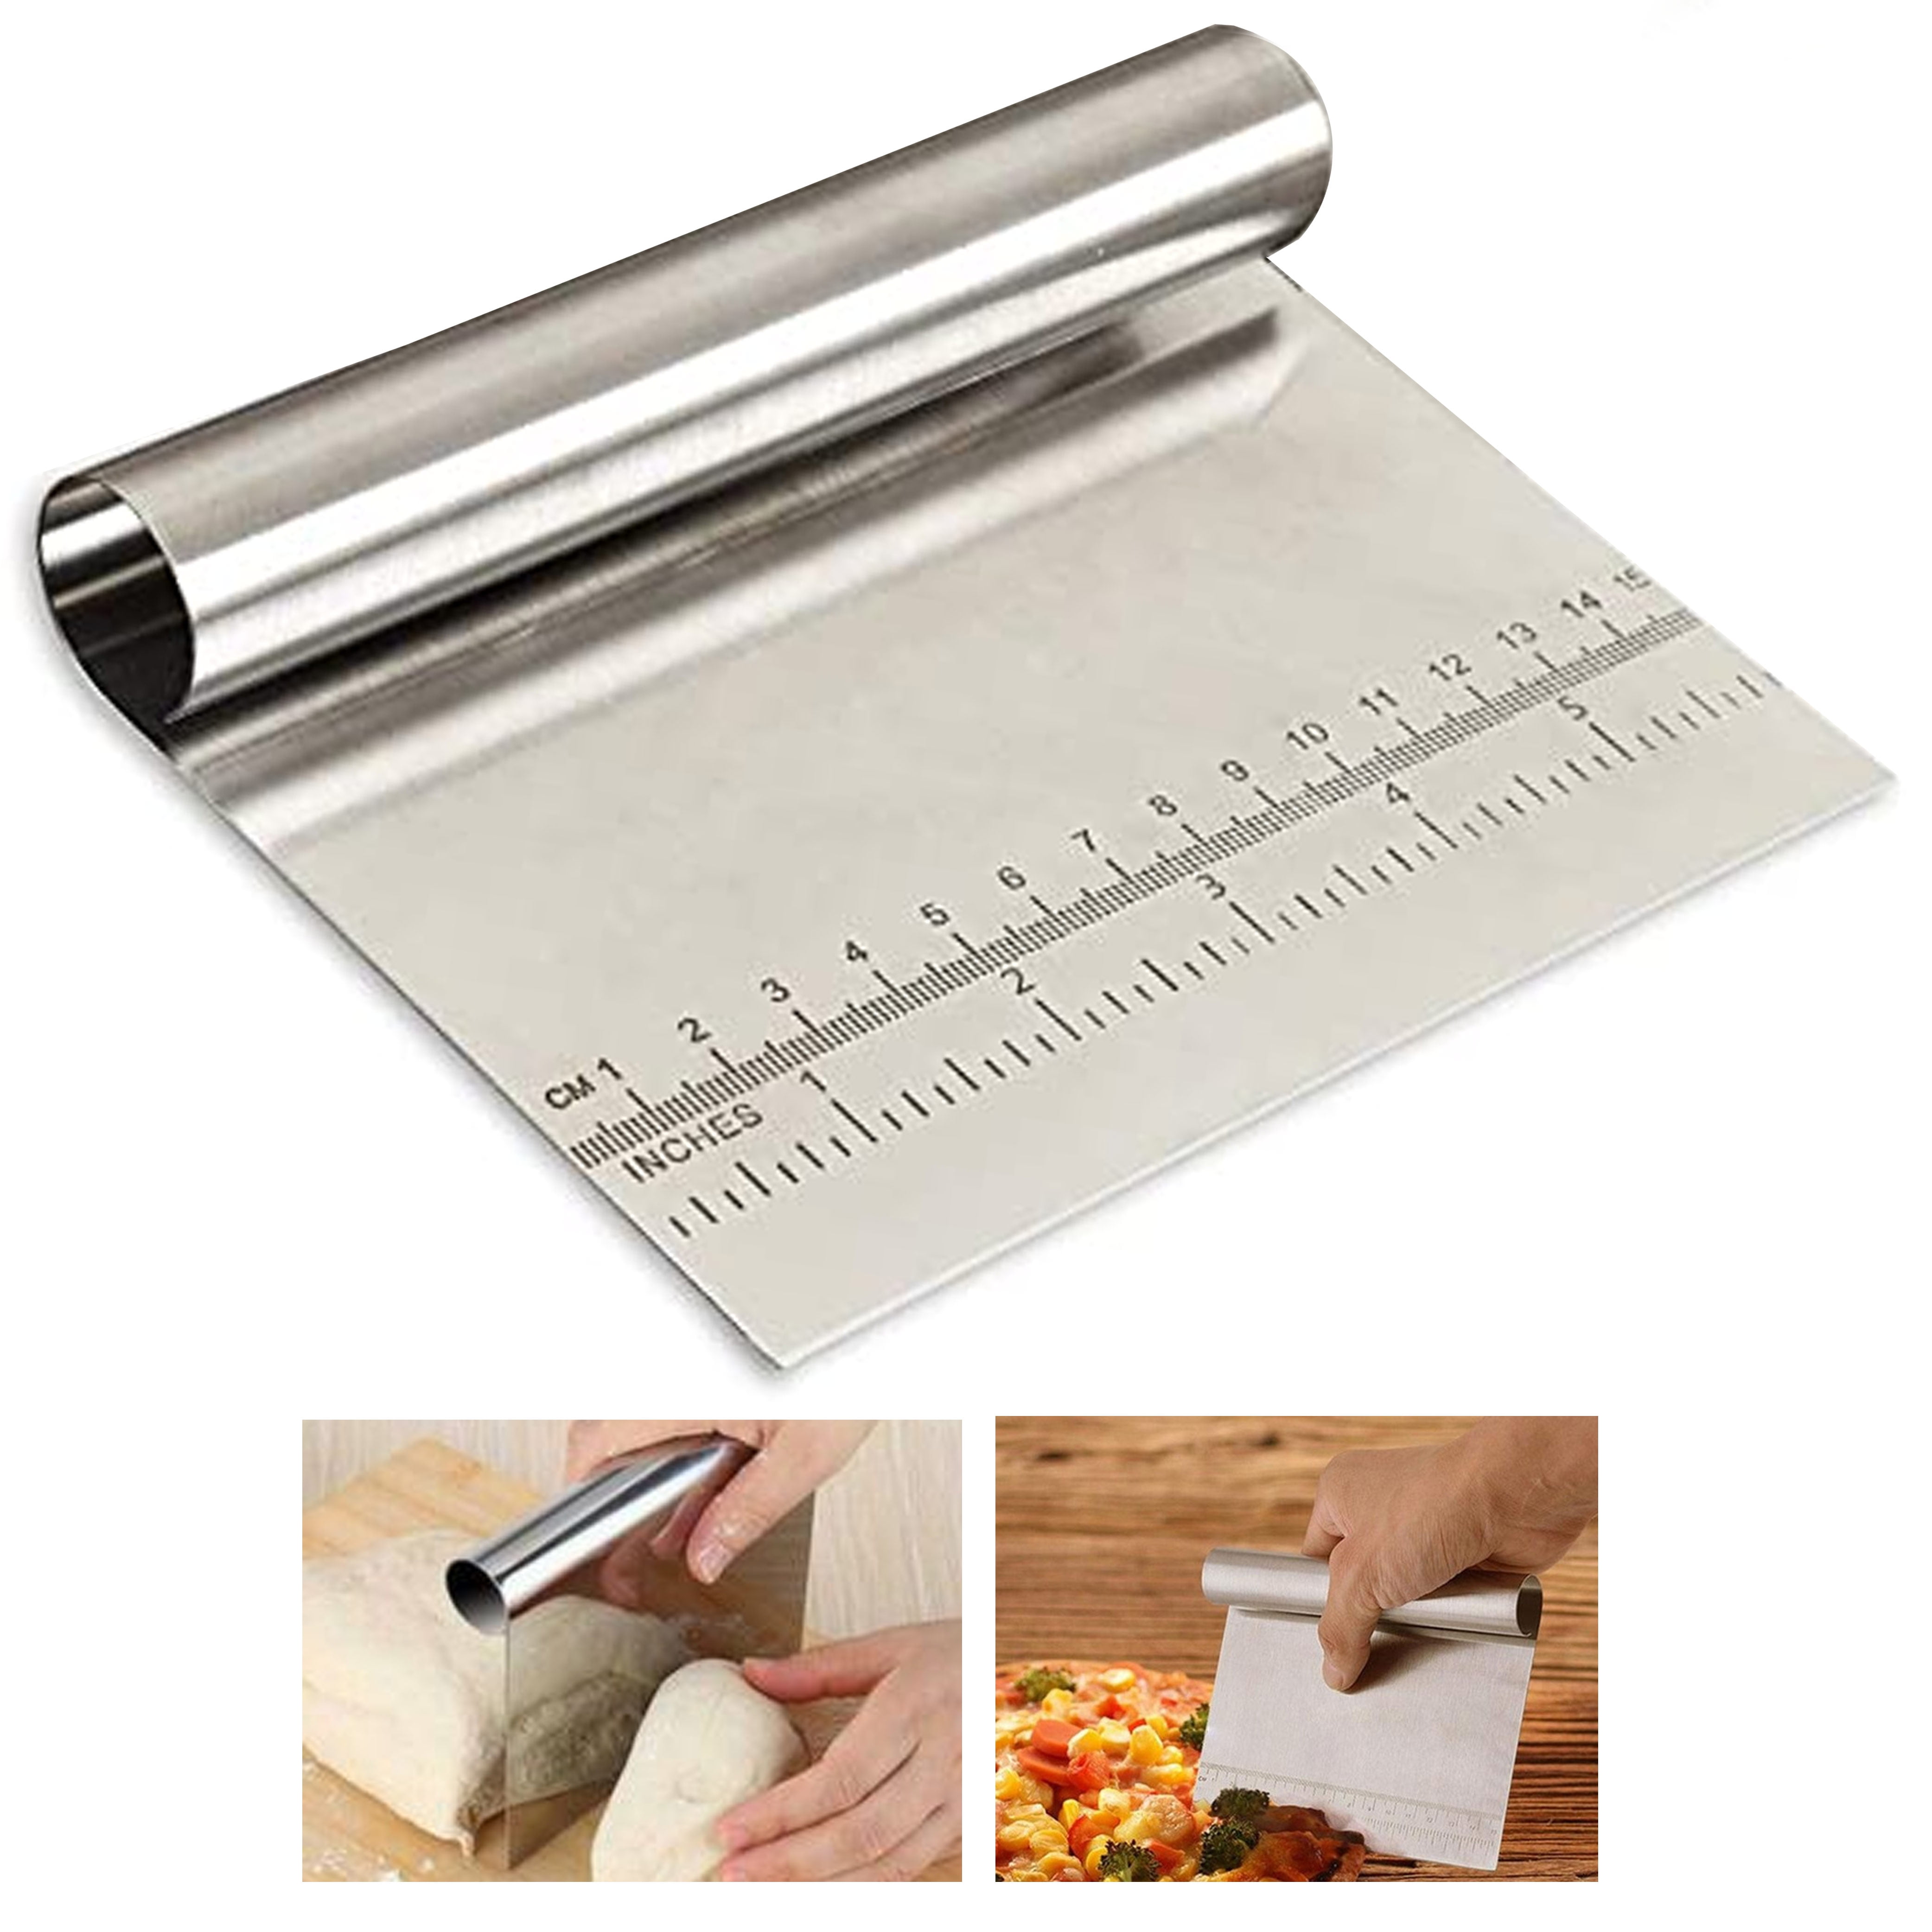 Stainless-Steel Vegetable Chopper/Scrapers Bench Measure Guide 6" x 4.75" F/S 